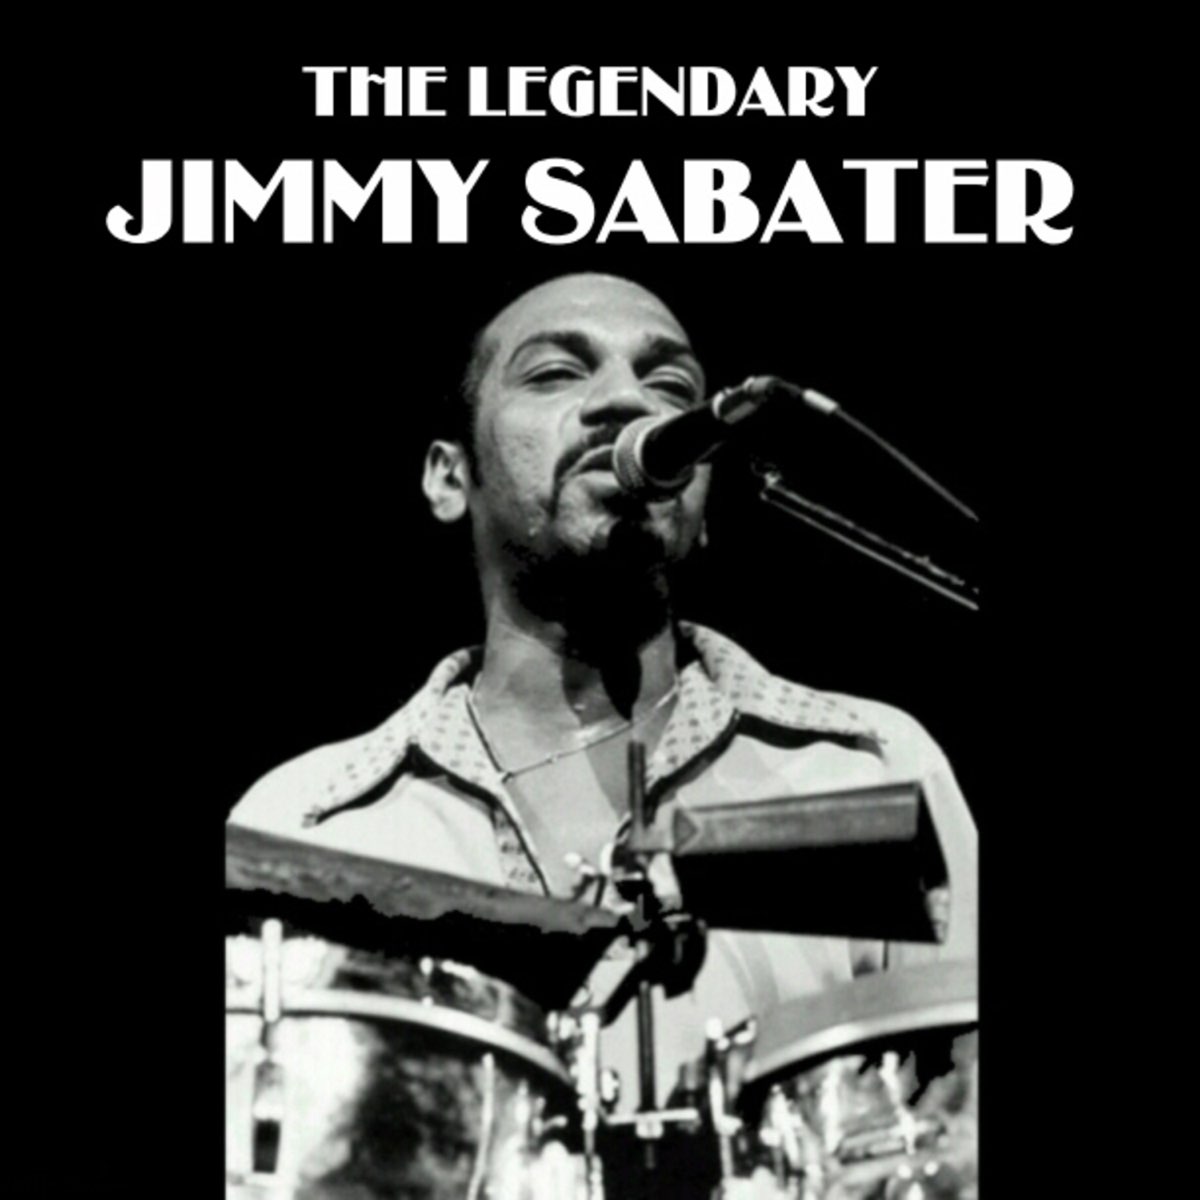 ‎the Legendary Jimmy Sabater By Jimmy Sabater On Apple Music 3701